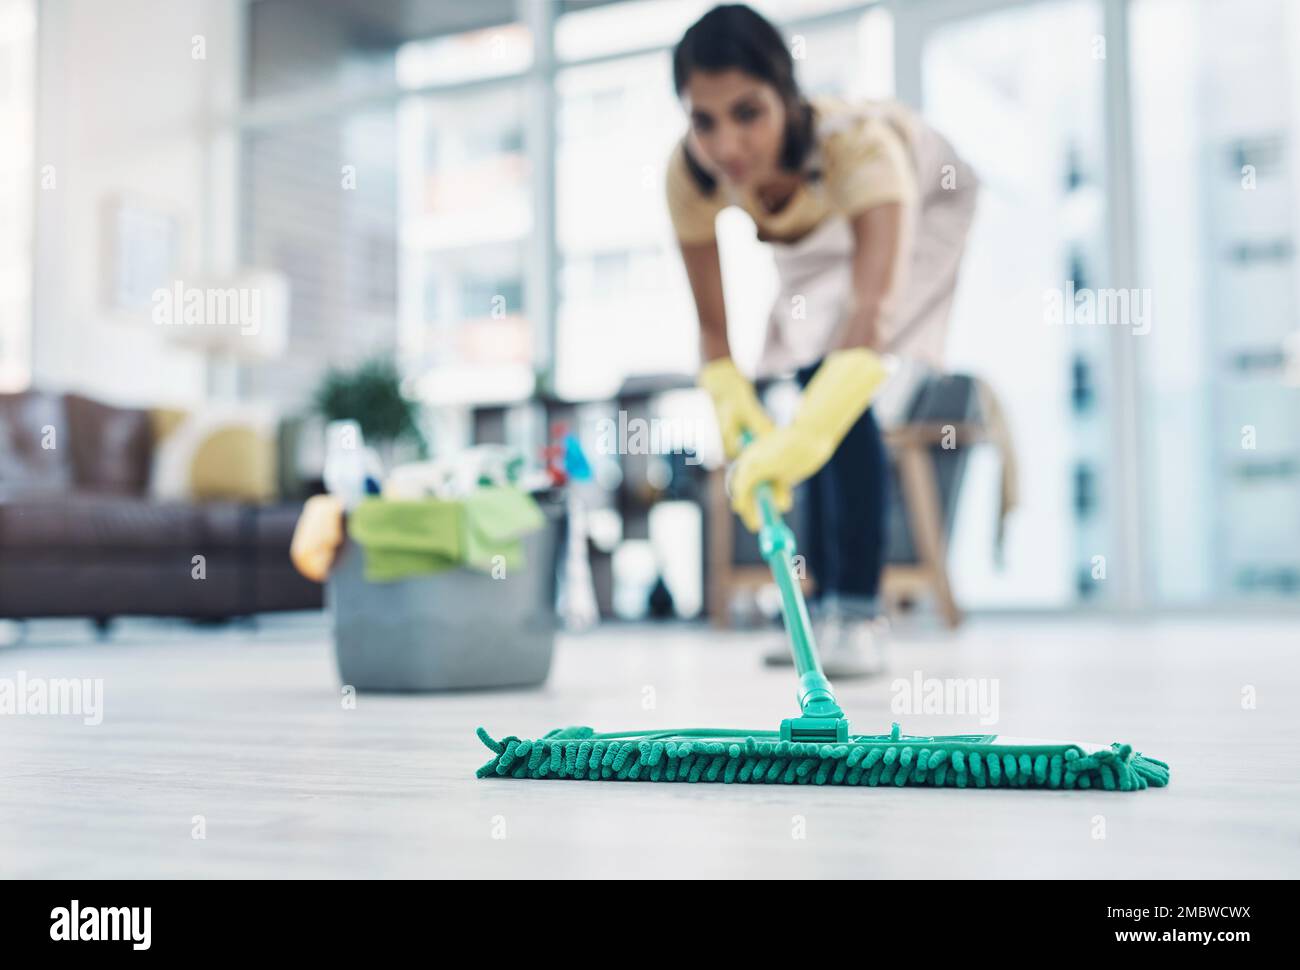 Cleaning Sign And Woman Mopping Floor In Office For Hygiene Health